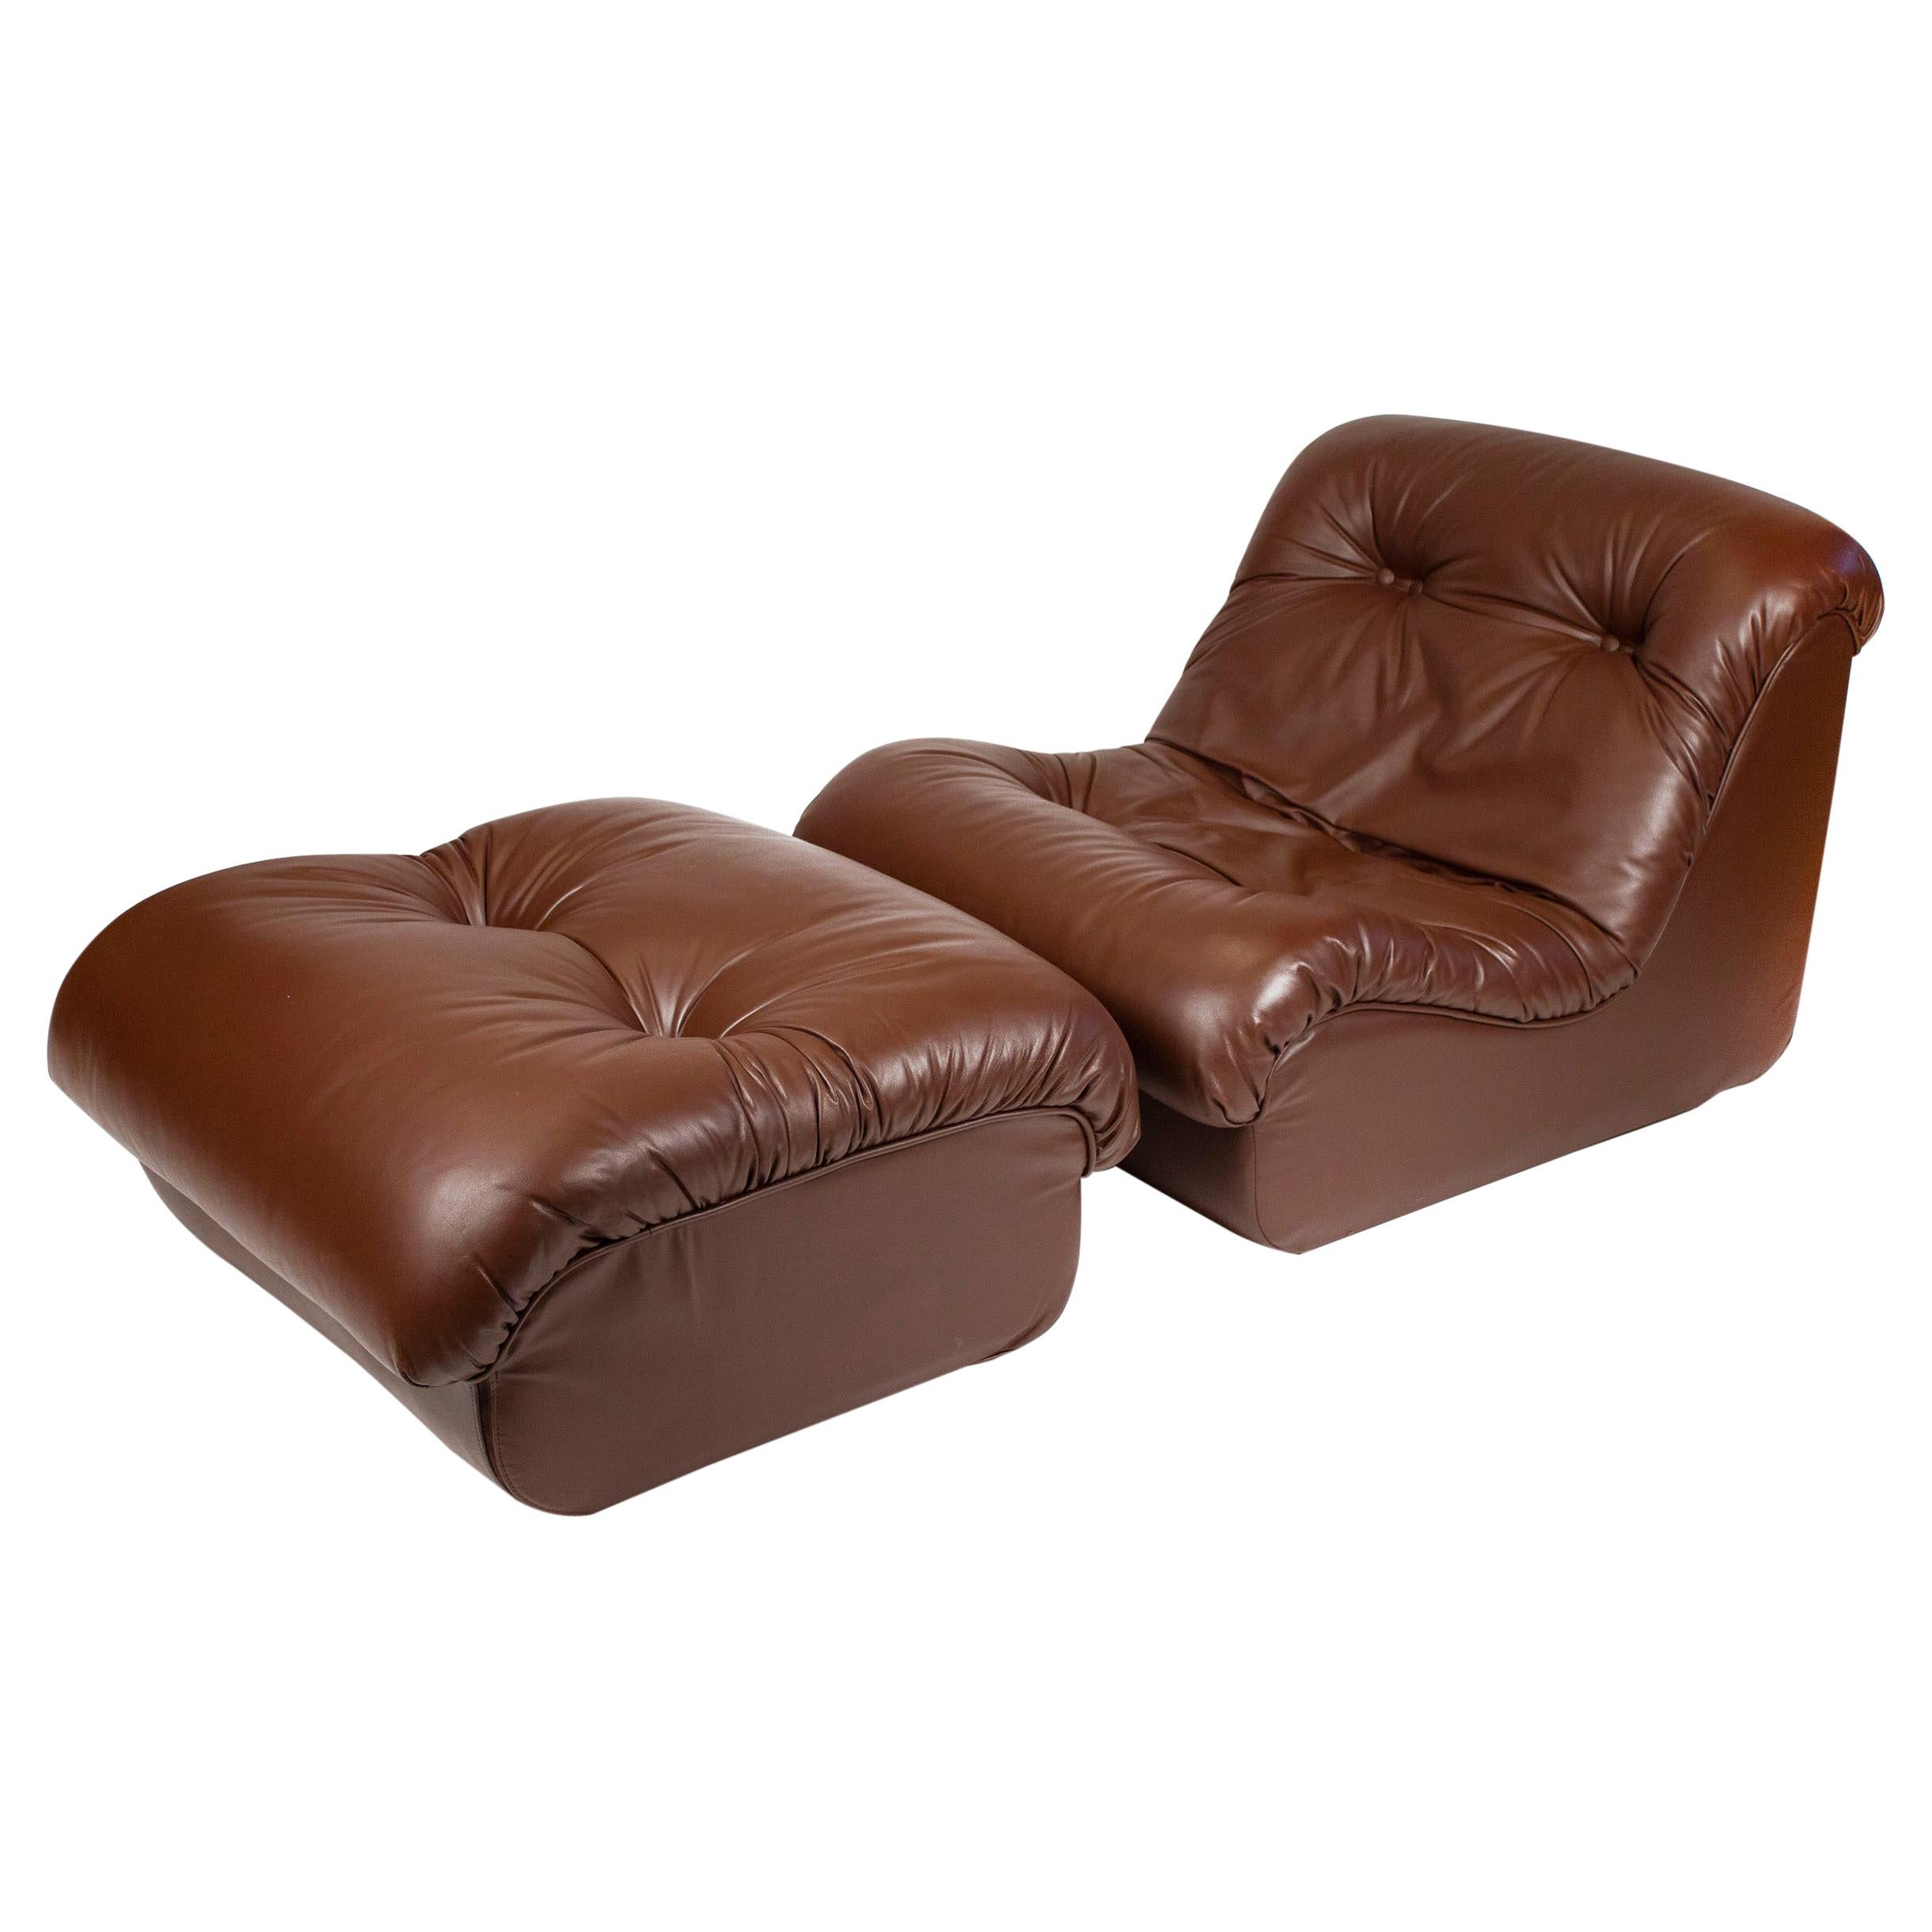 Pierre Paulin Artifort Lounge Chair and Ottoman in Chocolate Brown Leather 1970s